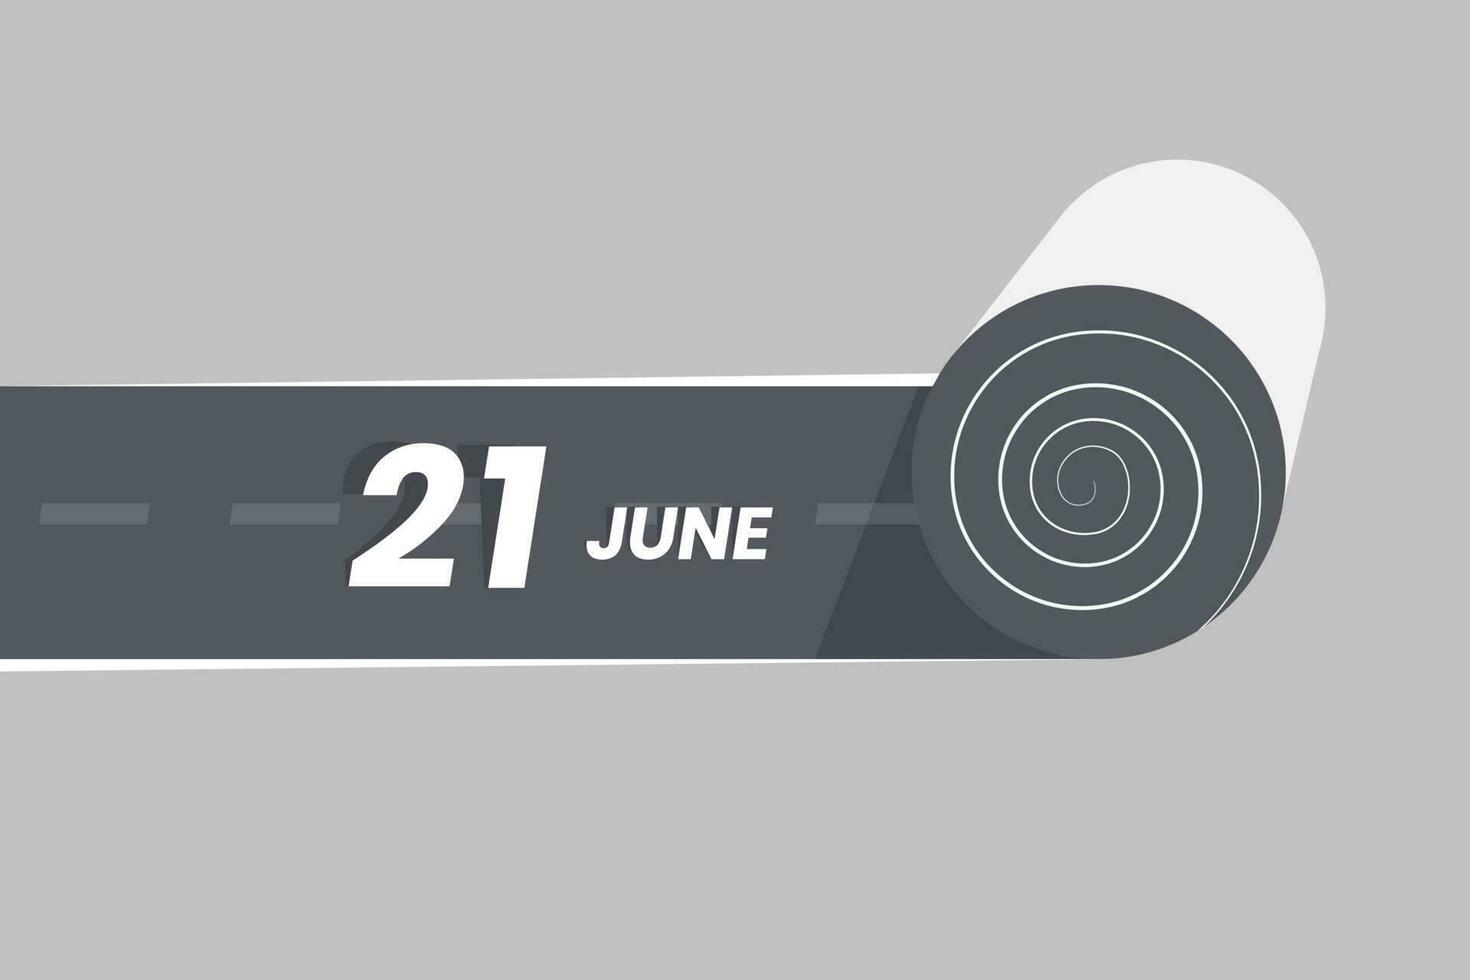 June 21 calendar icon rolling inside the road. 21 June Date Month icon vector illustrator.